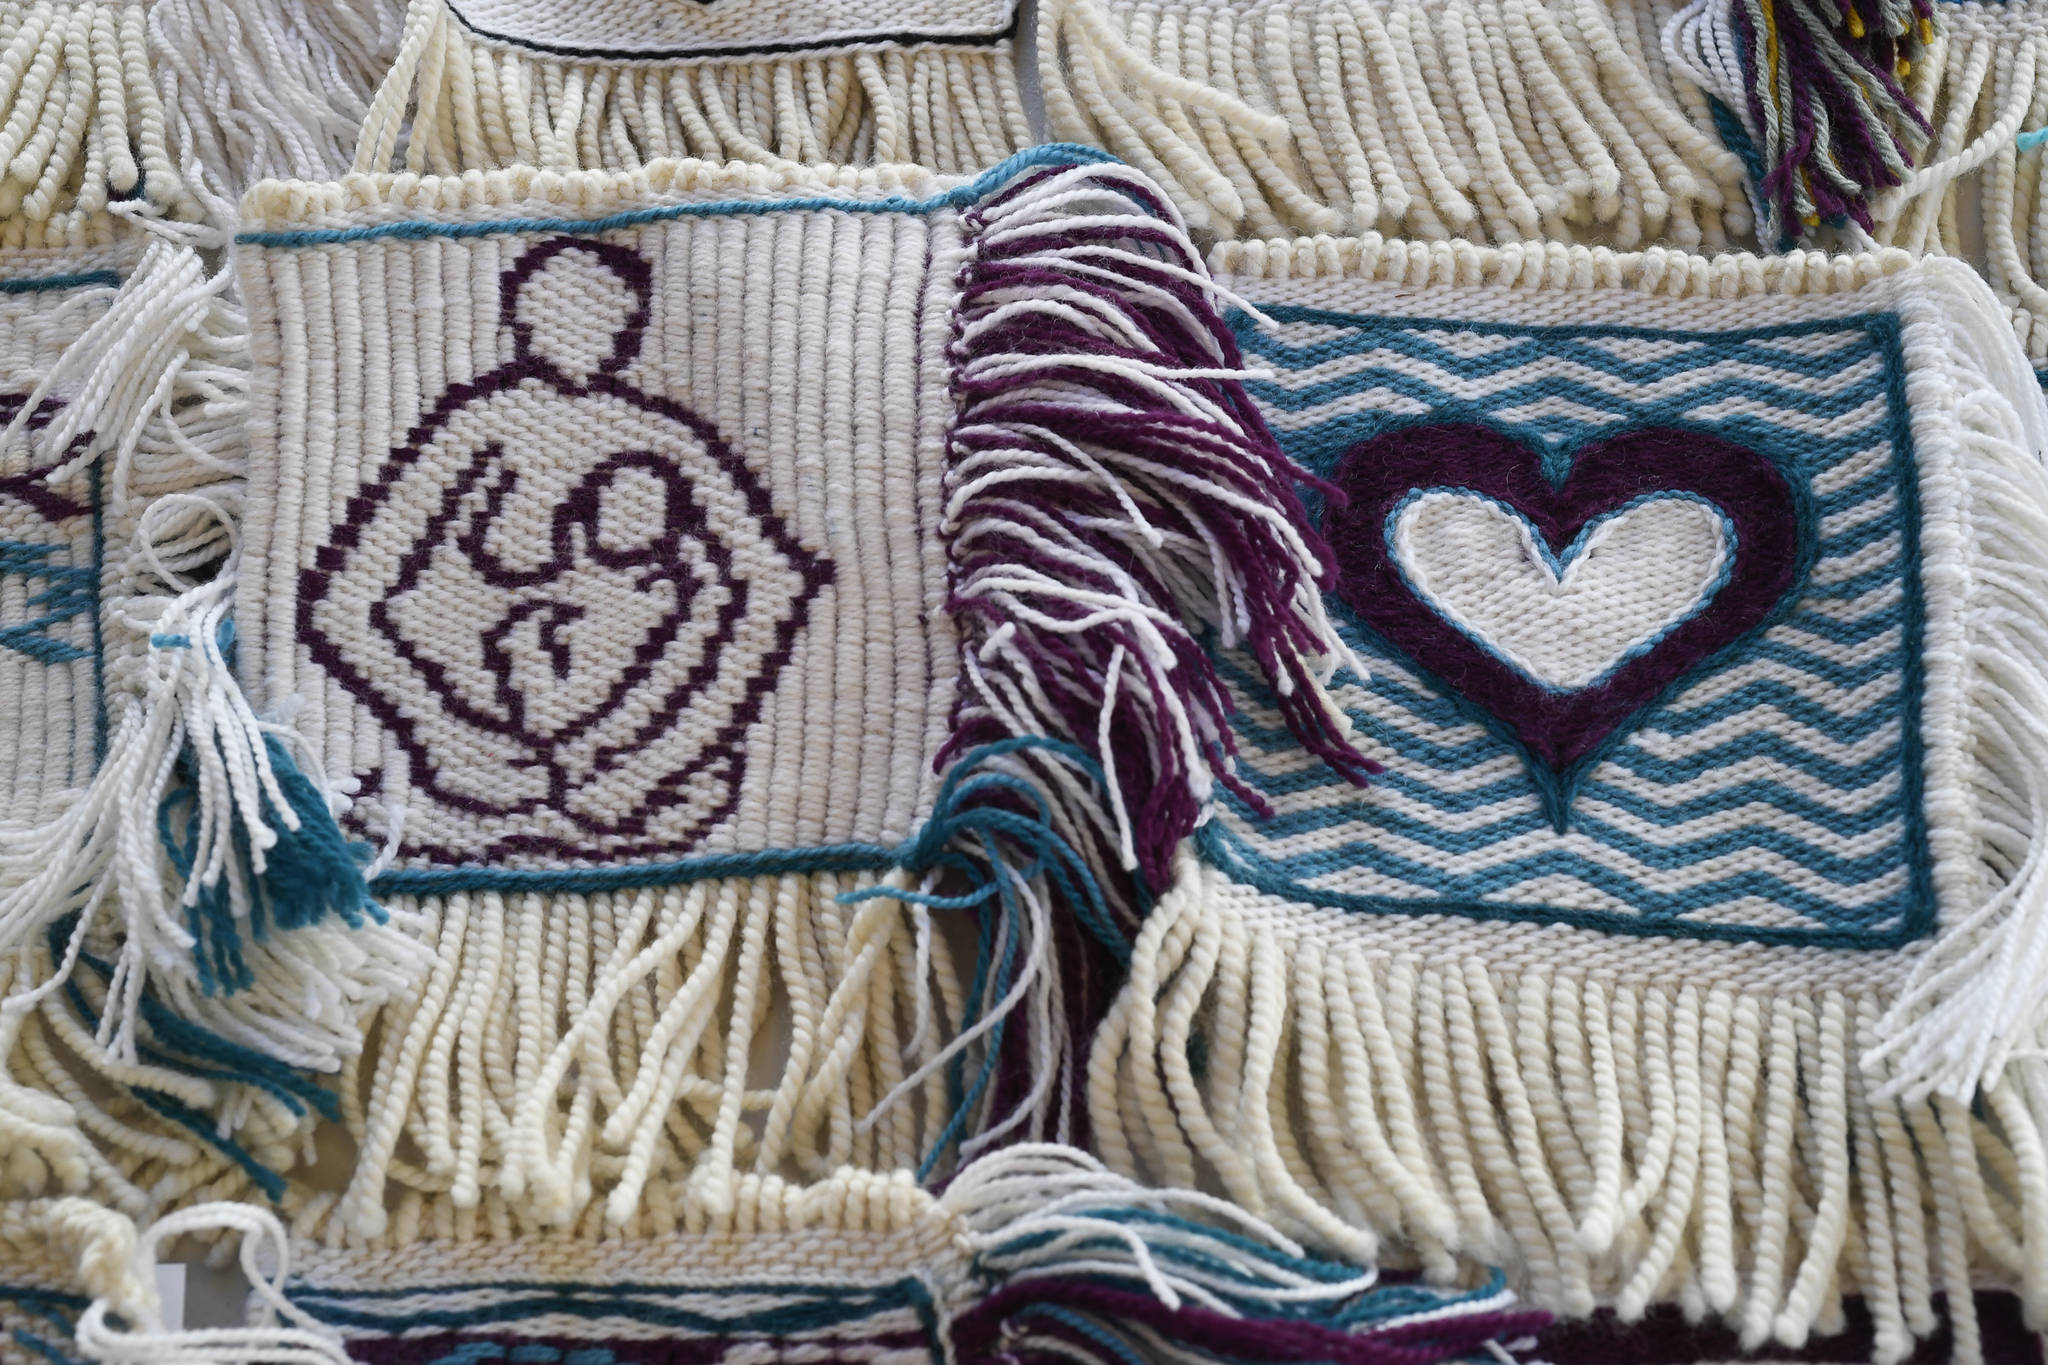 Woven squares by Chloe French, left, and Kathryn Rousso are part of the Giving Strength Robe project on Friday, Feb. 15, 2019. Juneau weaver Lily Hope is organizing dozens of Chilkat and Ravenstail weavers from all over North America to weave 5-inch-by-5-inch squares that will be combined to make one traditional indigenous robe. Once completed, the robe will be given to Aiding Women in Abuse and Rape Emergencies (AWARE). (Michael Penn | Juneau Empire)